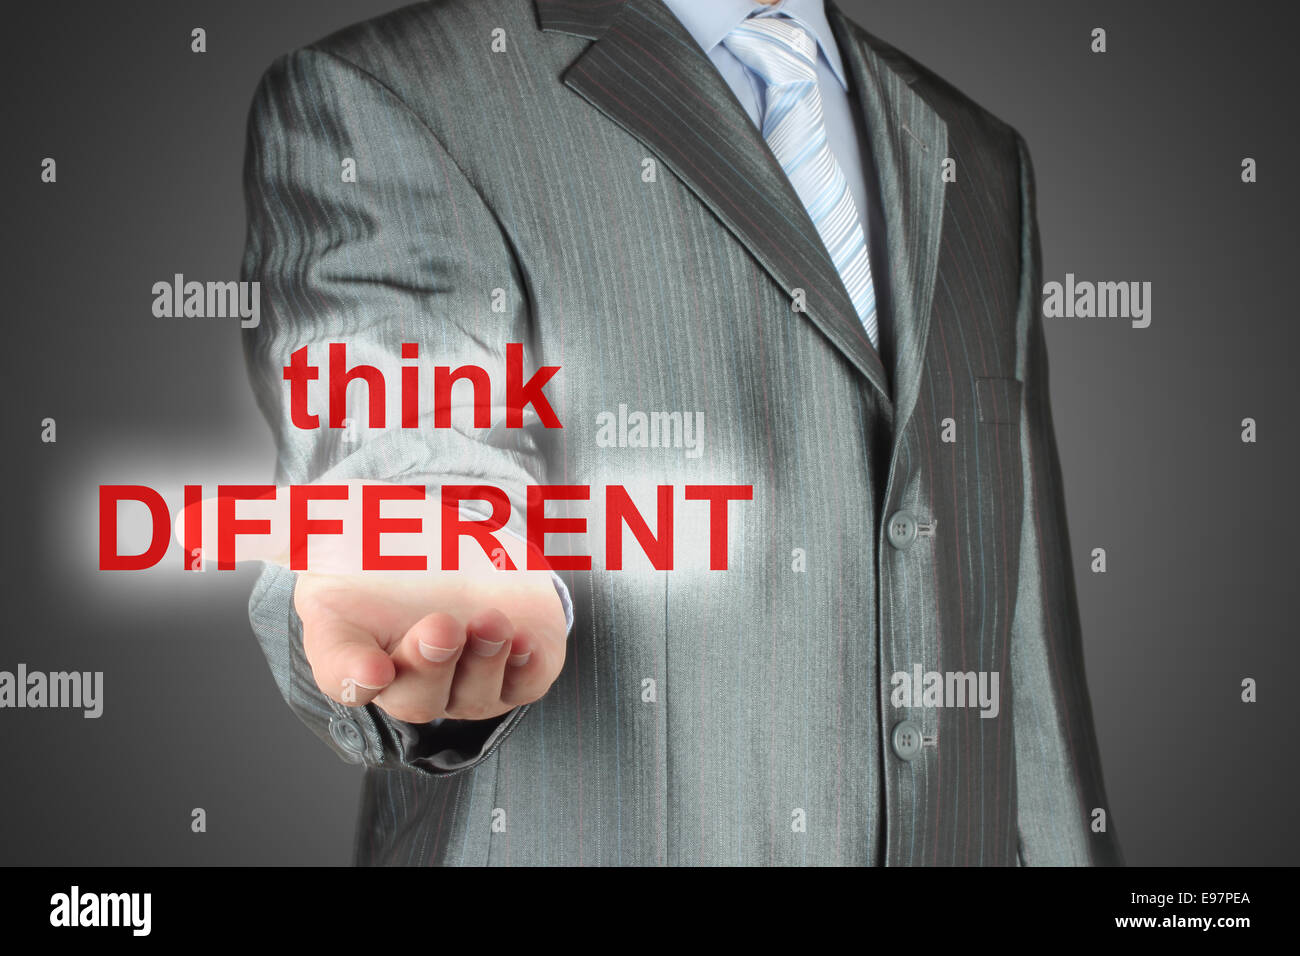 Man holds virtual words 'think different' on dark background Stock Photo